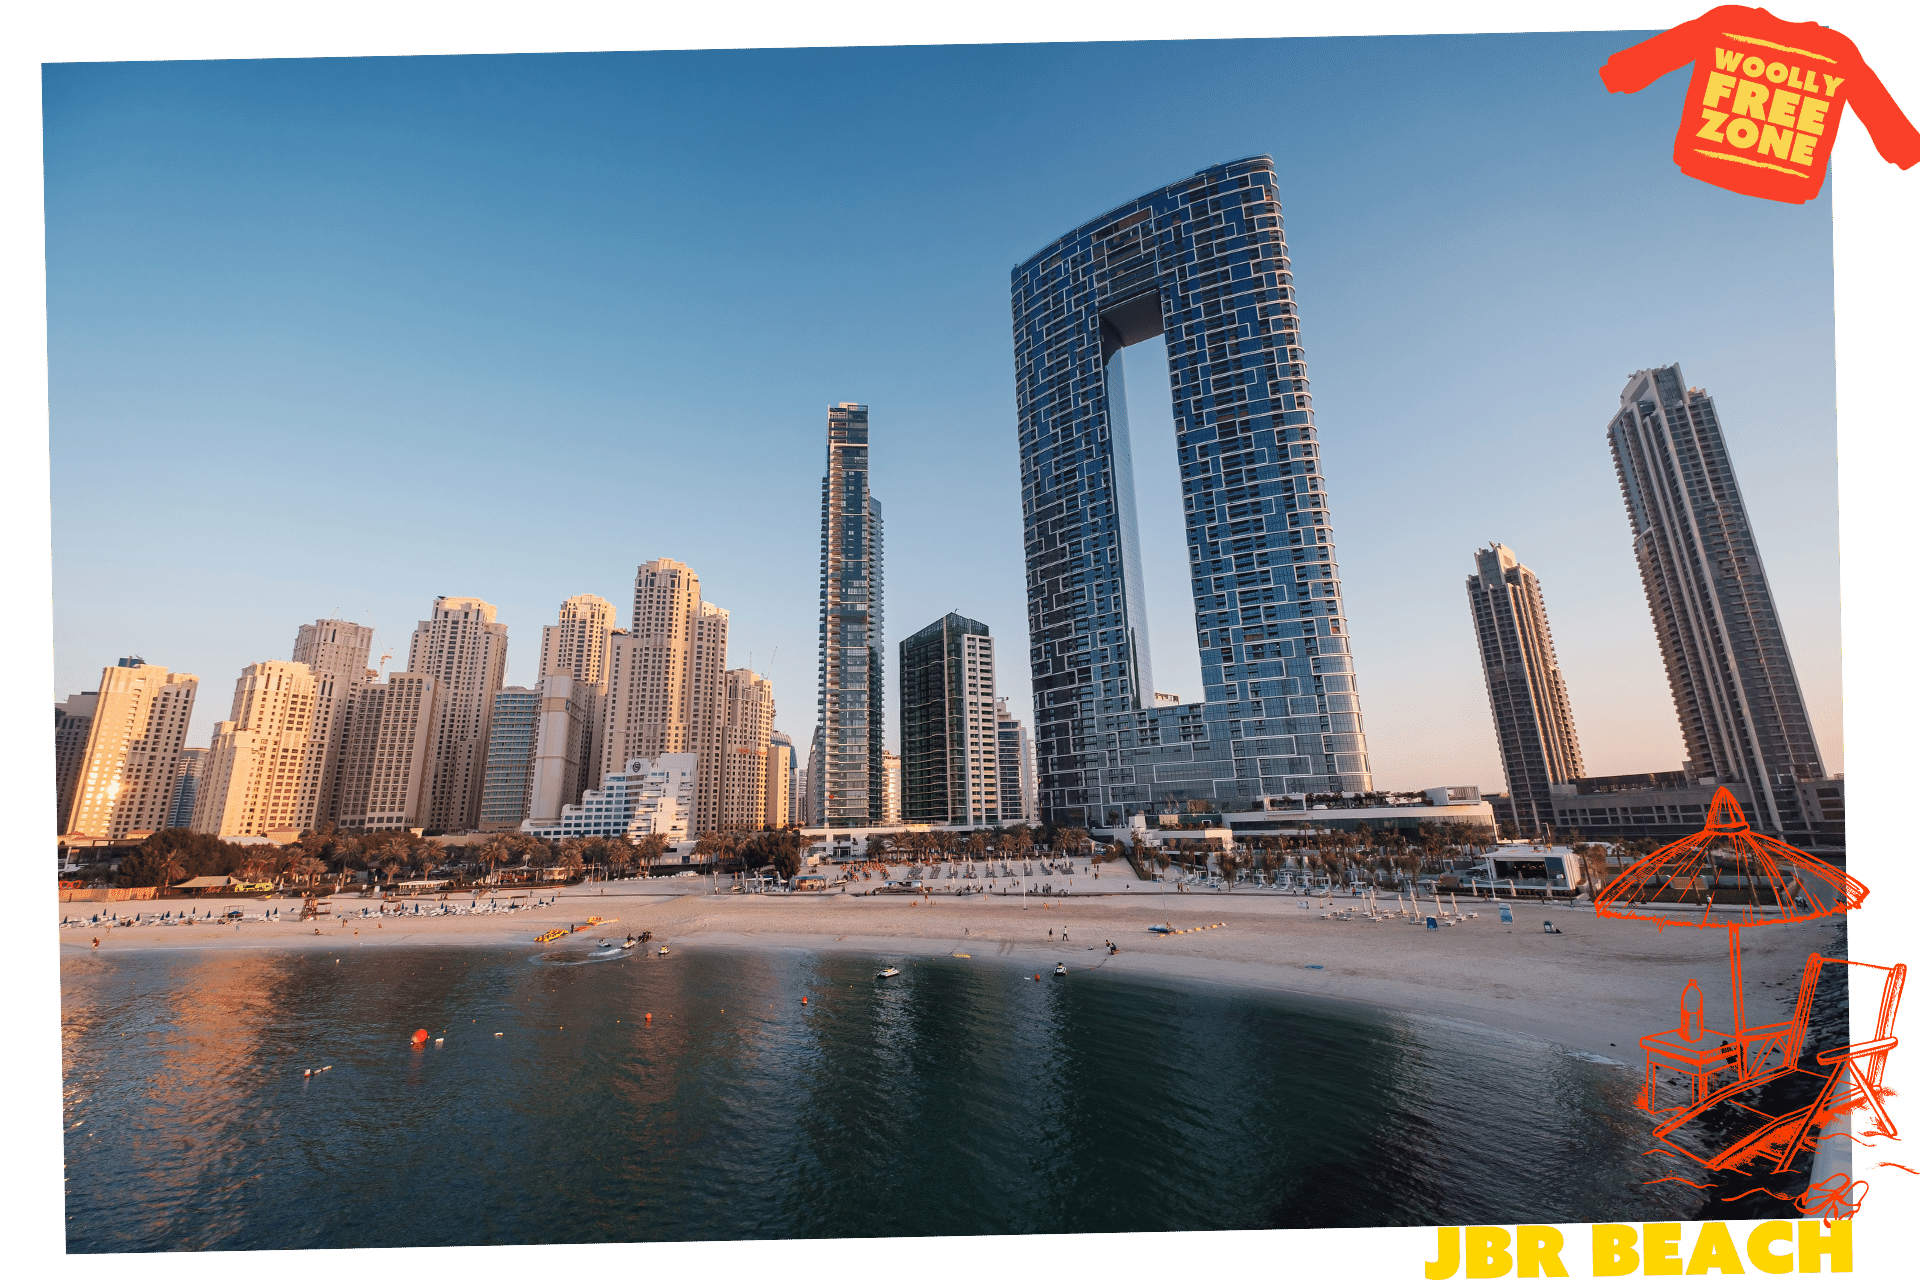 The beaches are one of the best free winter activities in Dubai. JBR Beach, with high rises along the sand, and the Address Beach Resort Dubai towering over it.